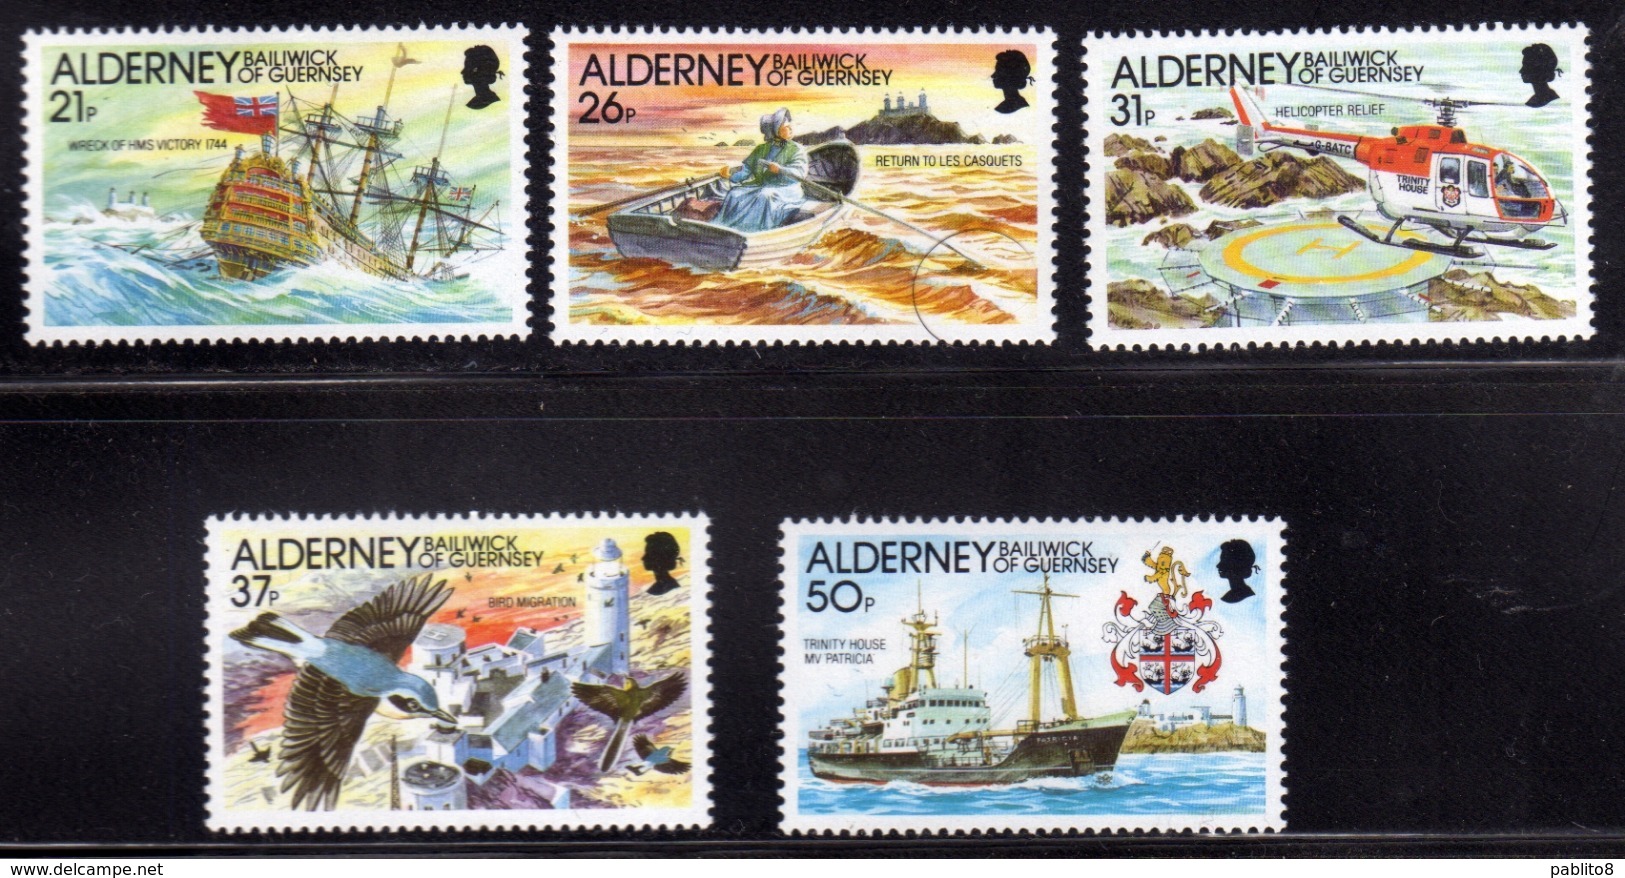 ALDERNEY 1991 HISTORY OF CASQUETS LIGHTHOUSE AUTOMATION FARO AUTOMATICO COMPLETE SET SERIE COMPLETE MNH - Alderney